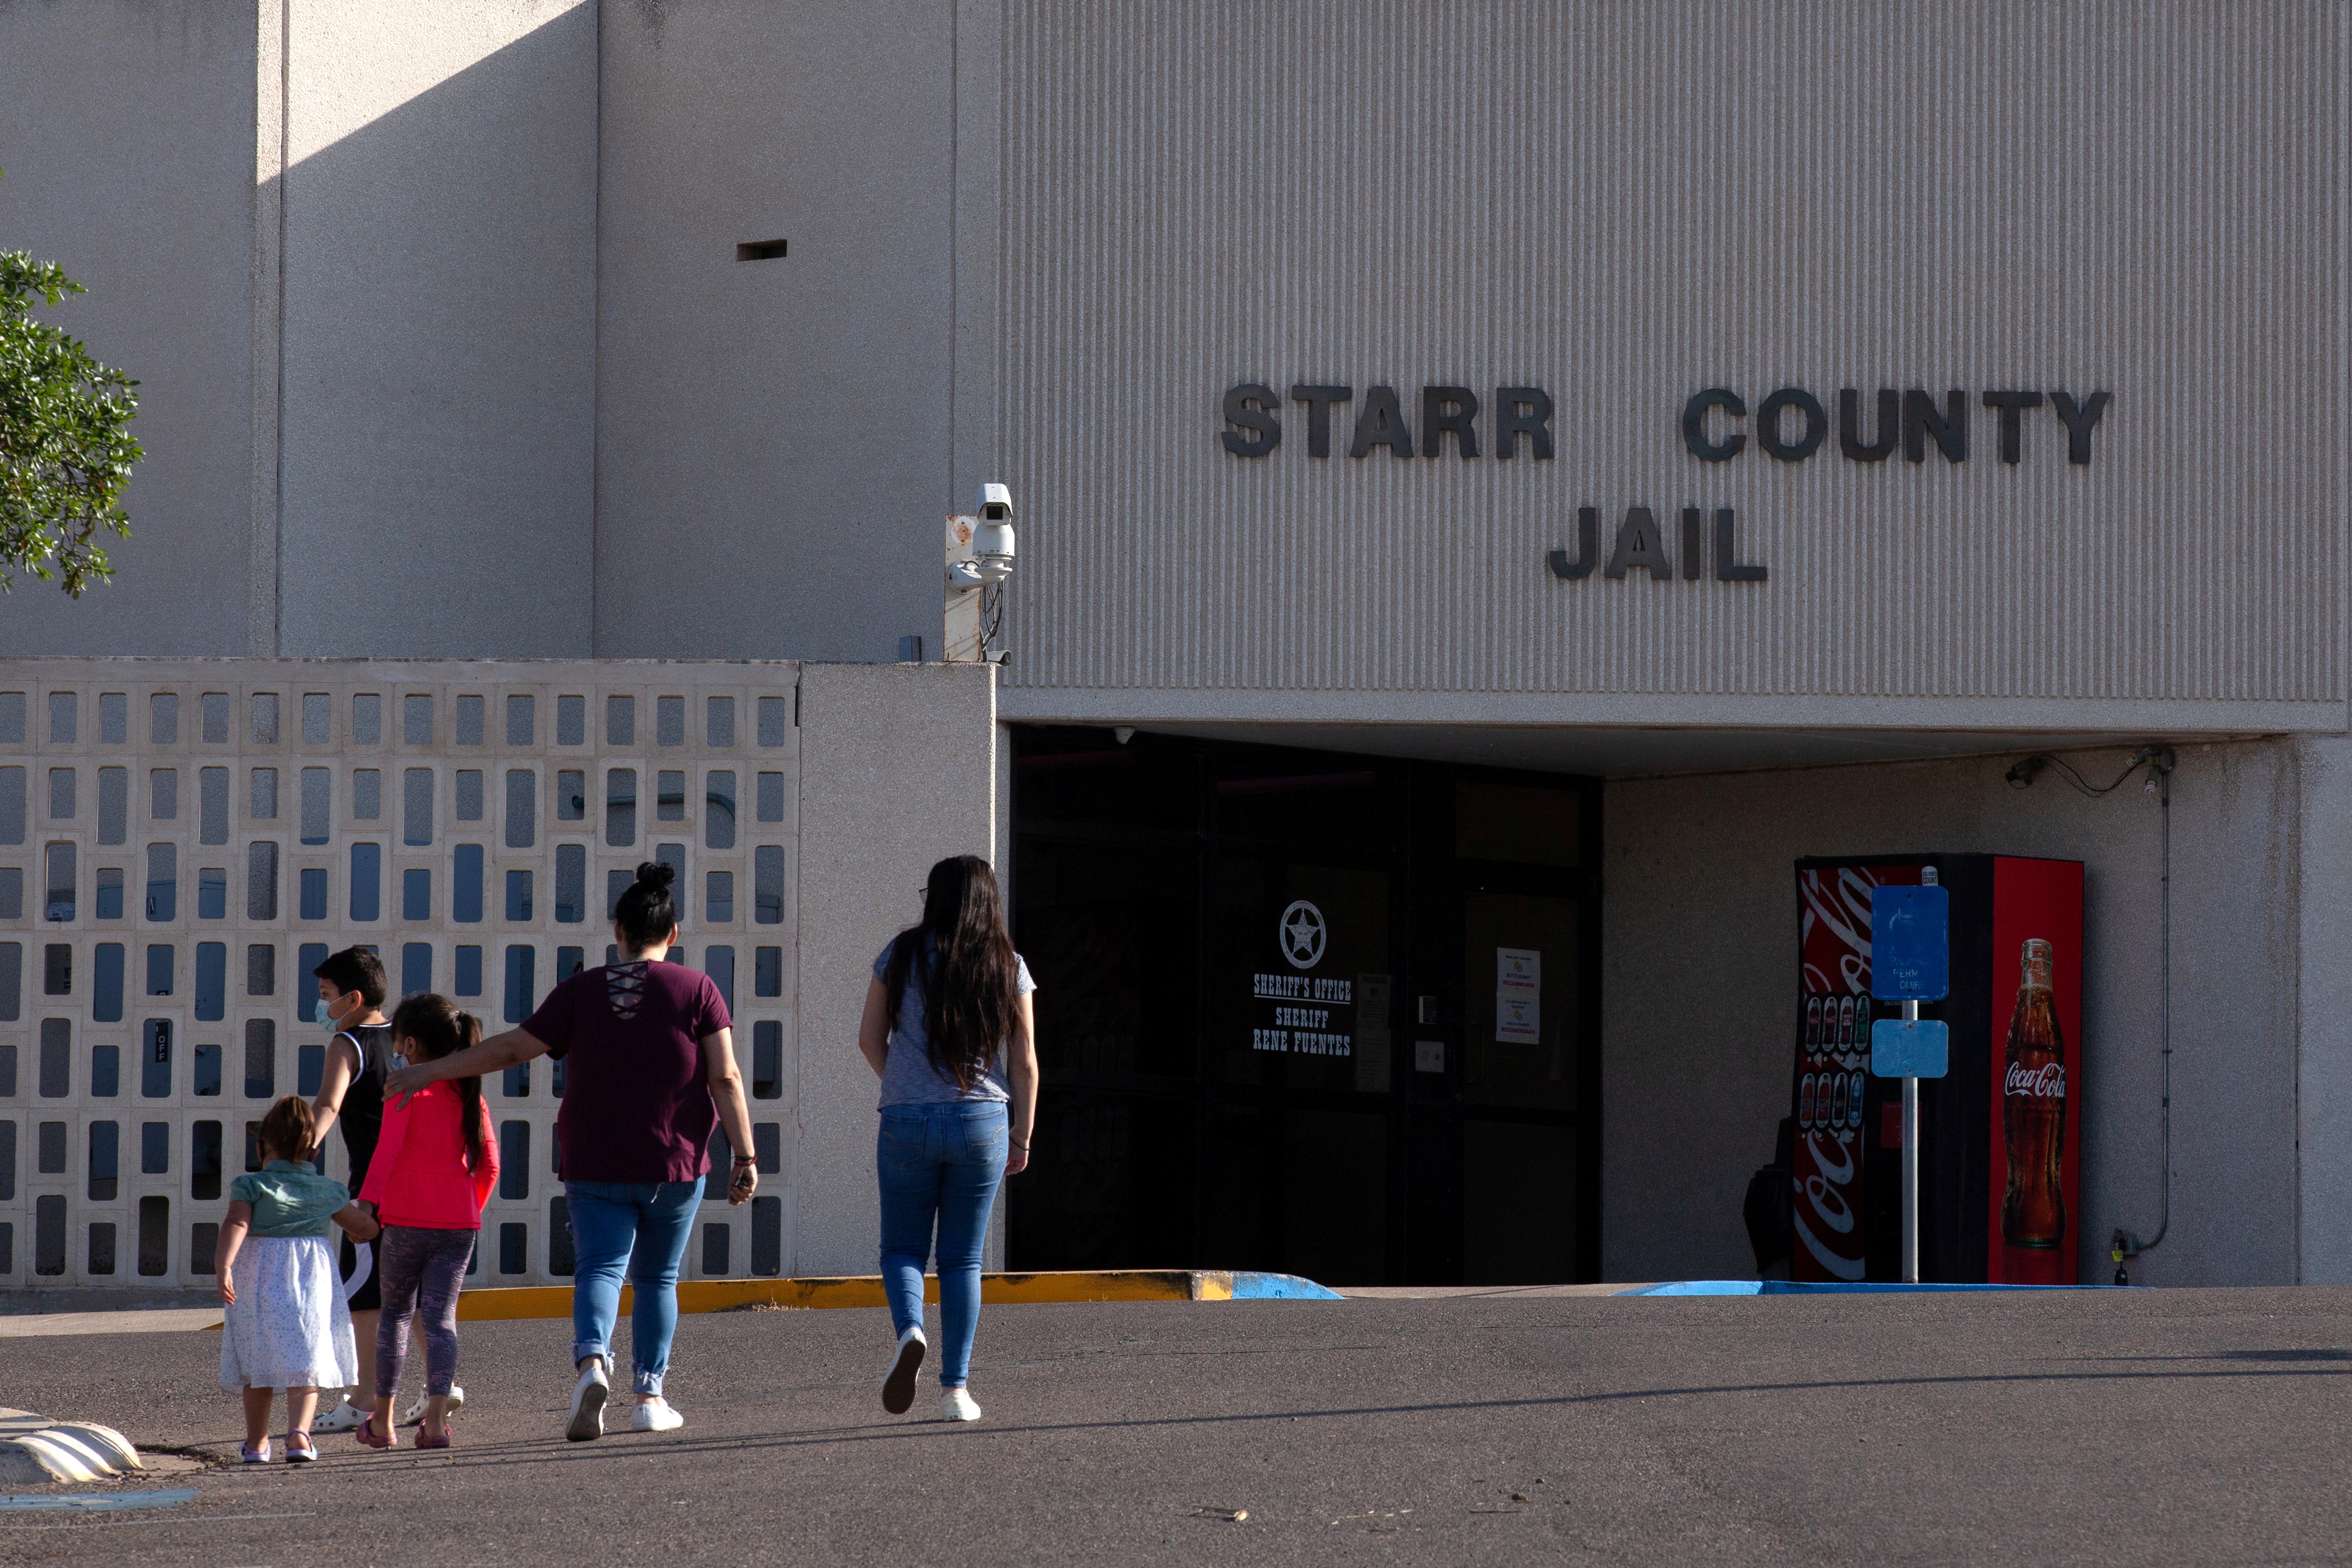 Starr County Jail where woman is held on abortion charge